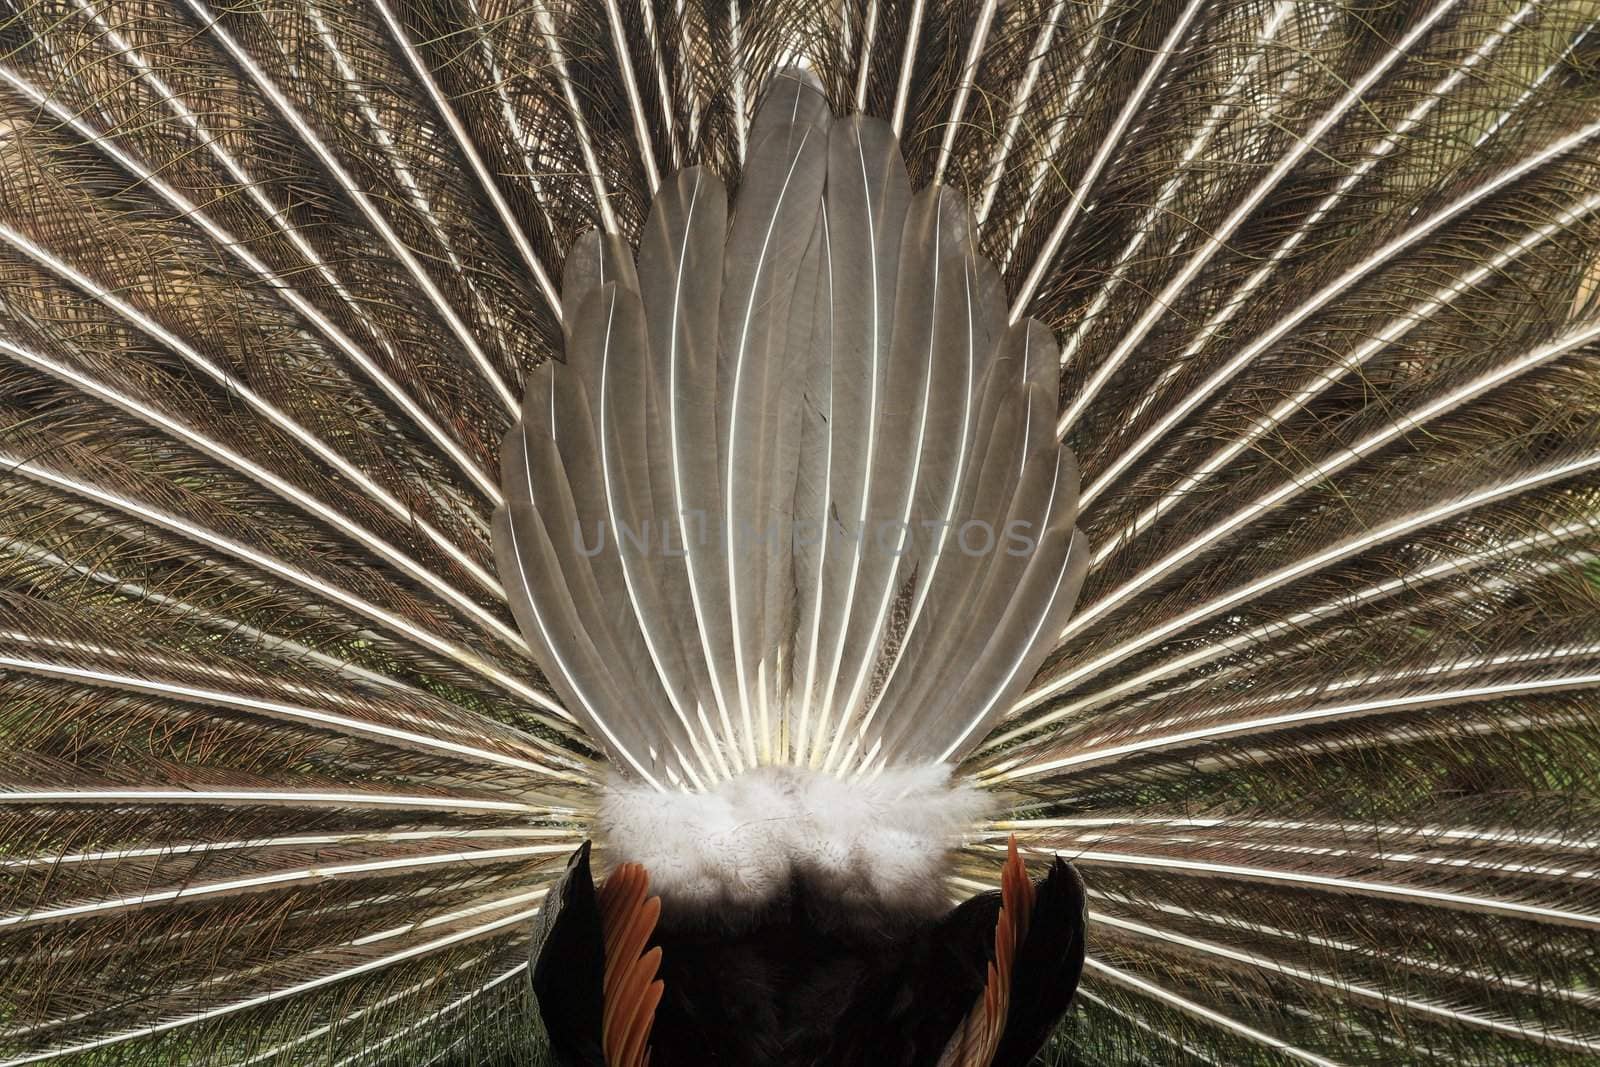 Peacock with spread plumage from the rear